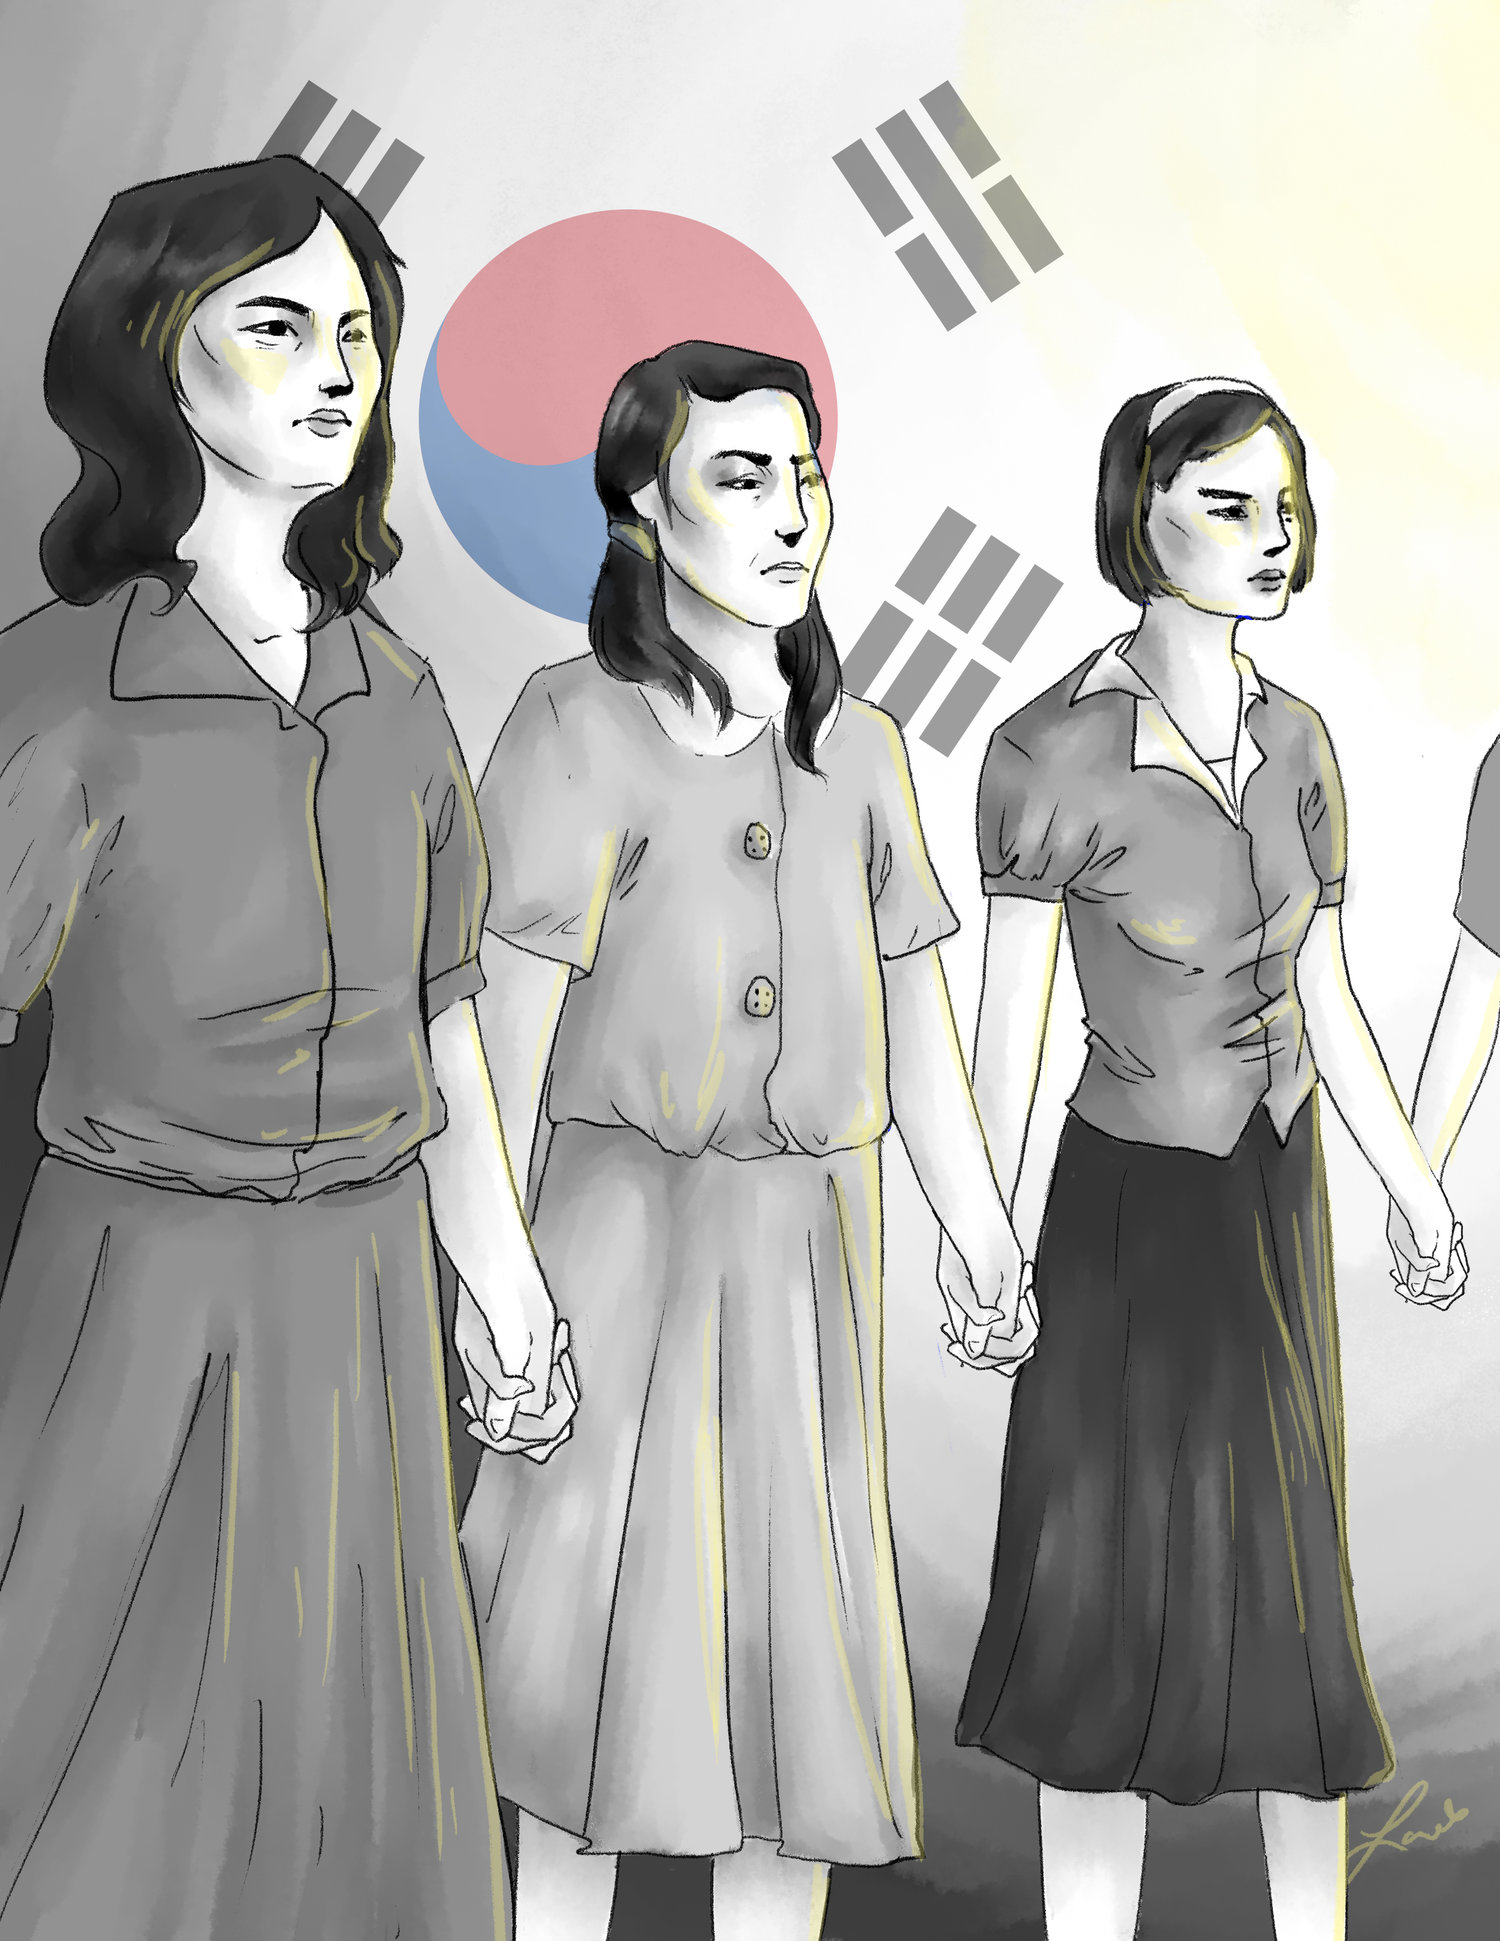 Women standing in front of the flag of South Korea, holding hands